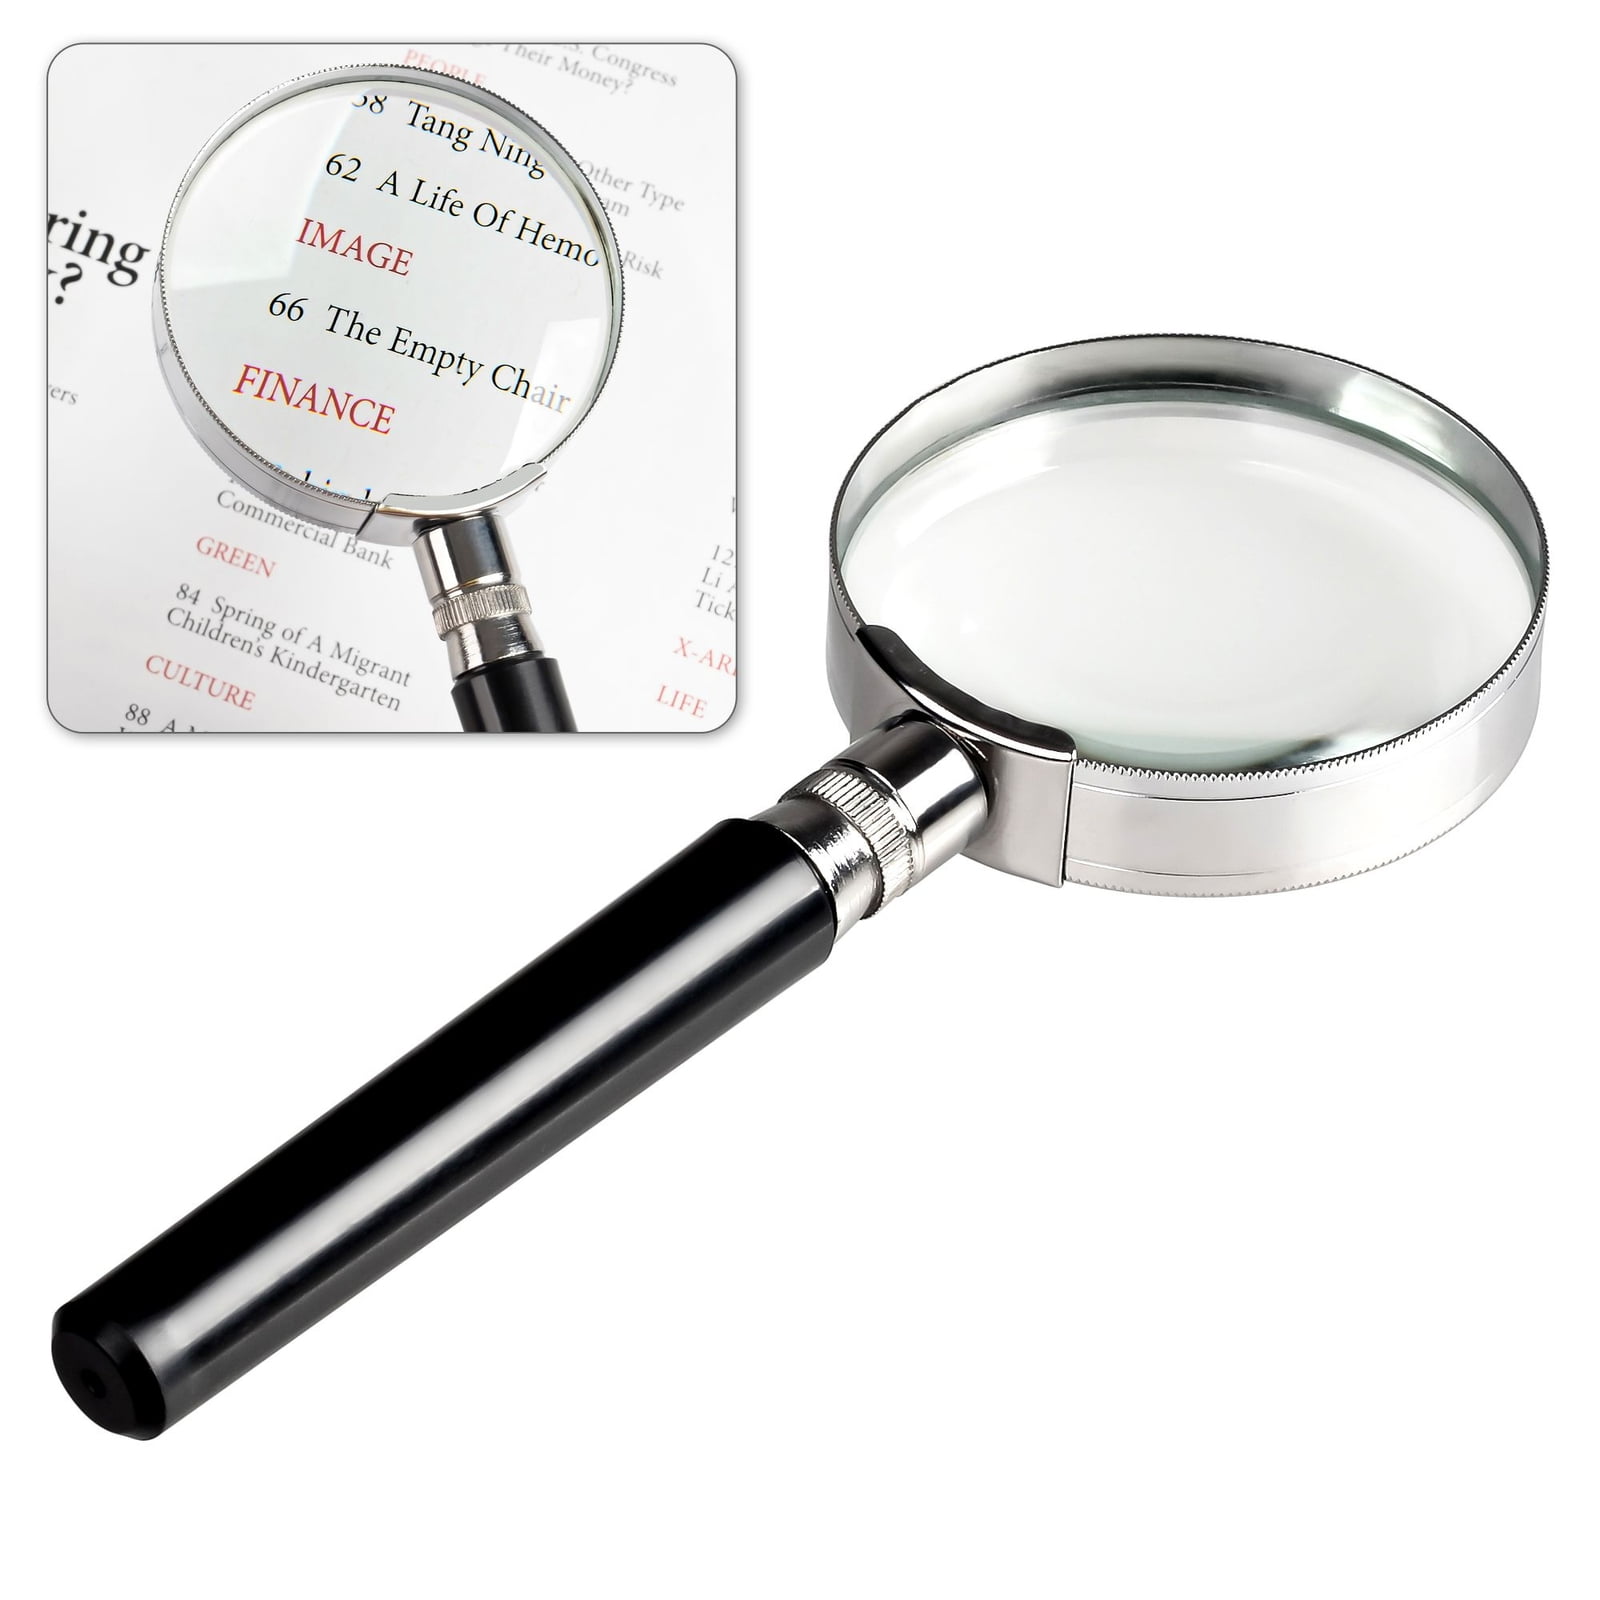 Insten 10X Magnifying Glass, 2 Inch Handheld Glass Reading Magnifier for  Small Print and Maps, Close Examination of Small Objects (Black)